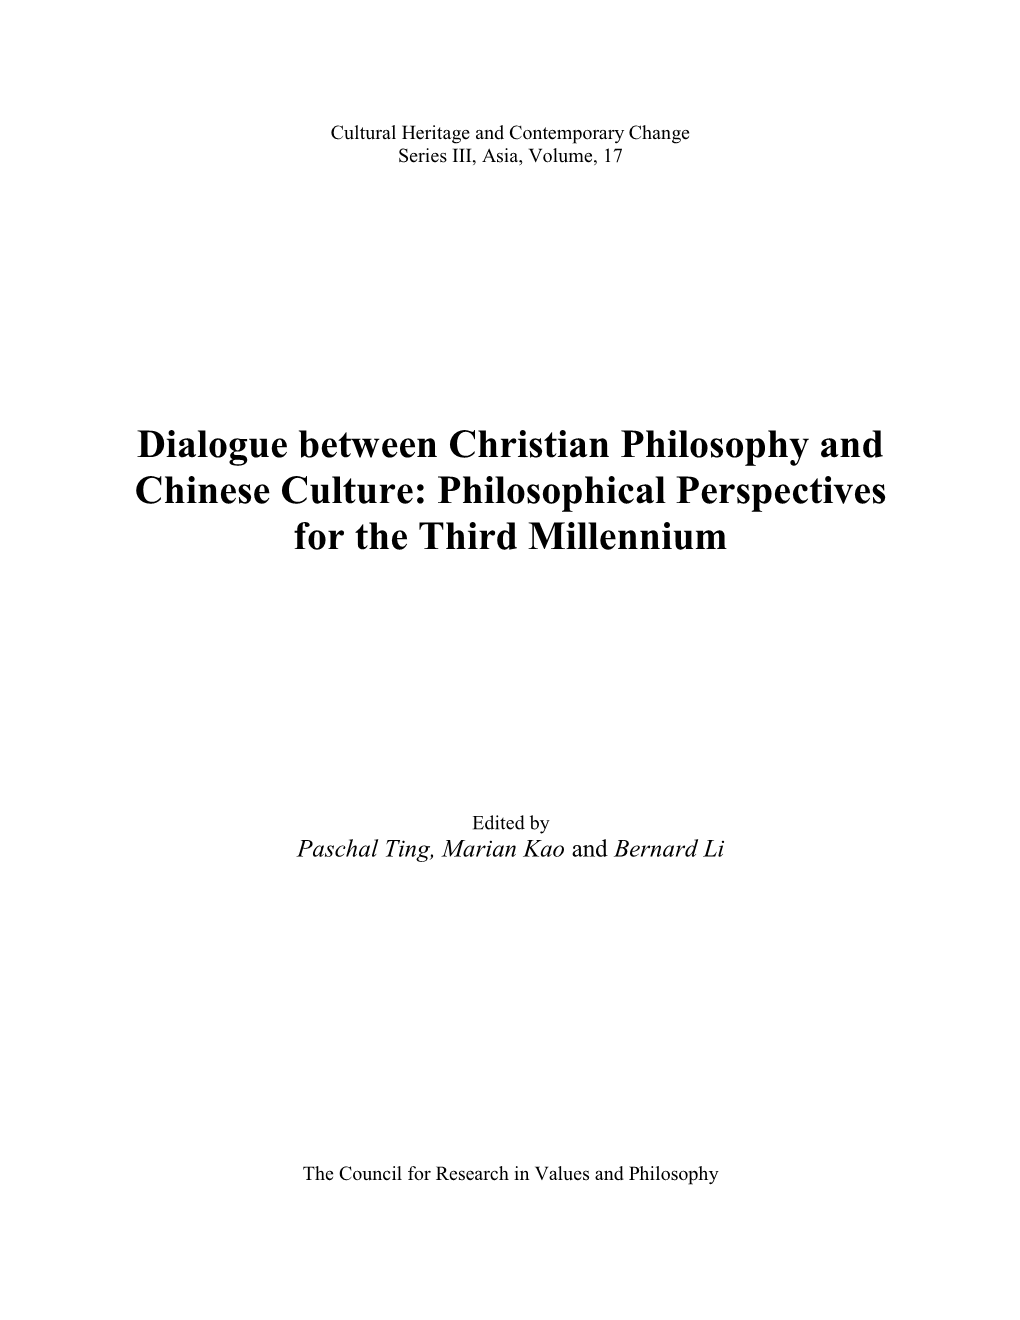 Dialogue Between Christian Philosophy and Chinese Culture: Philosophical Perspectives for the Third Millennium